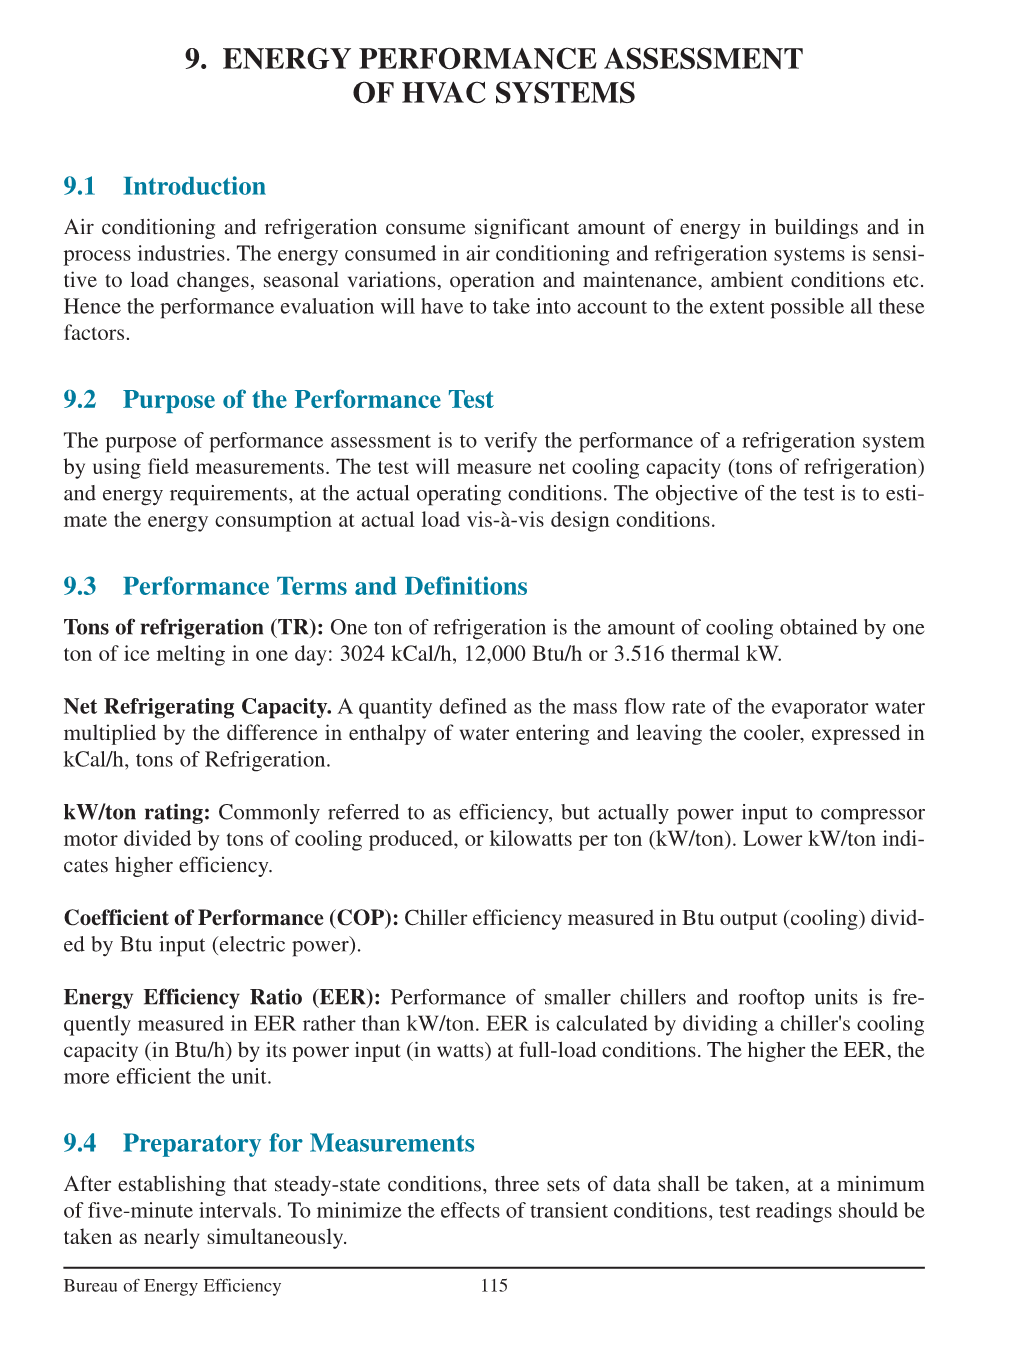 9. Energy Performance Assessment of Hvac Systems